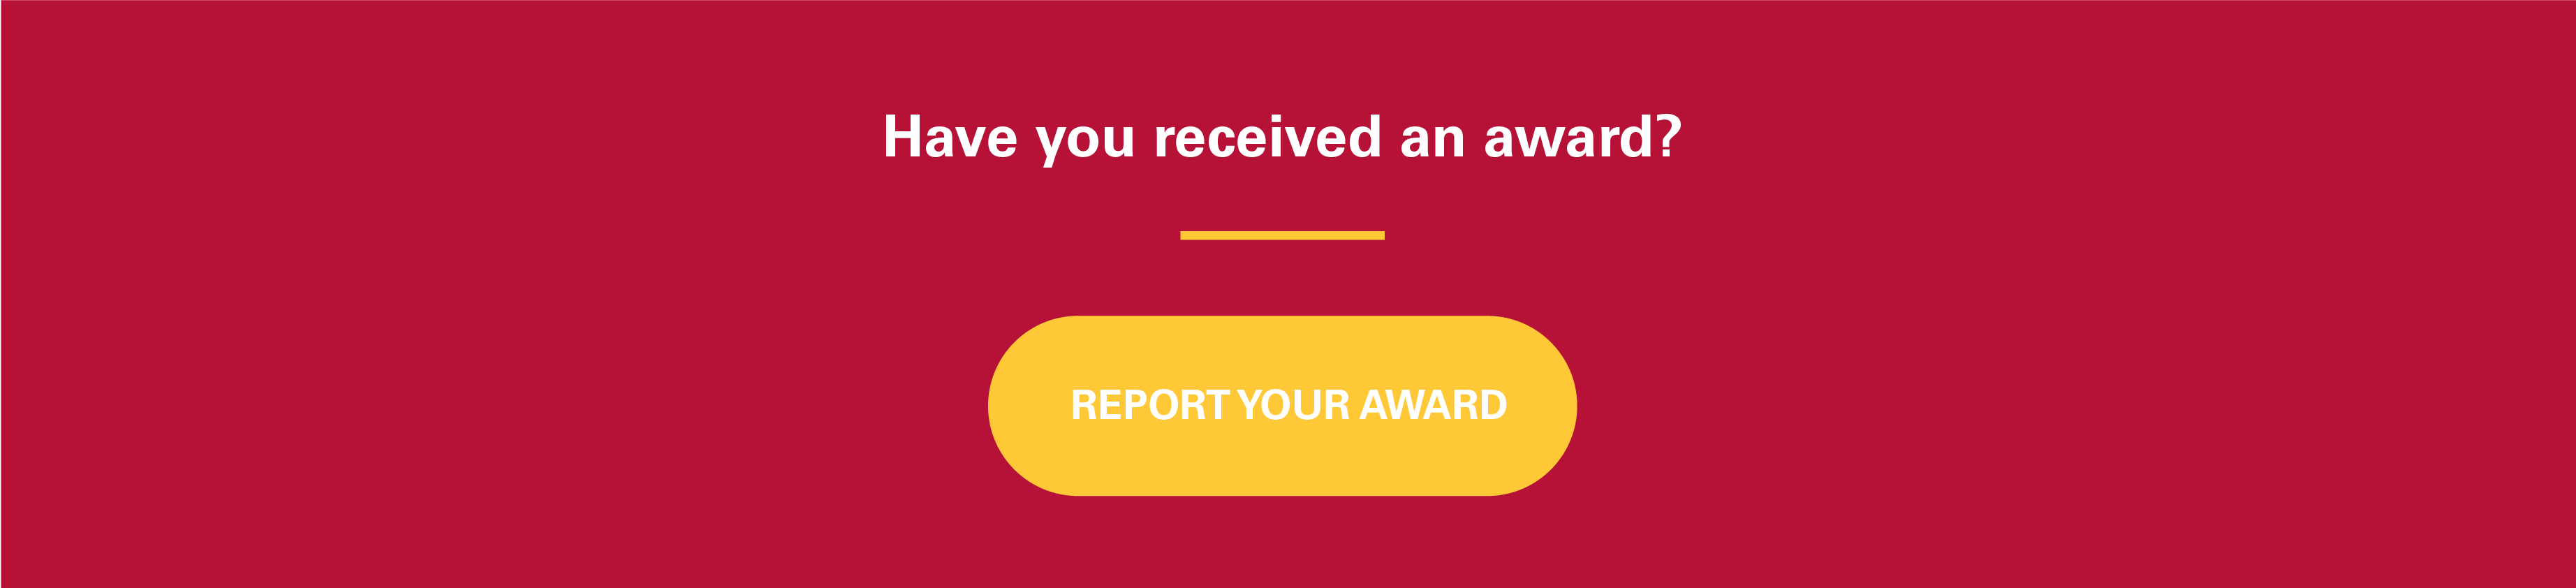 Have you received an award? Report your award.